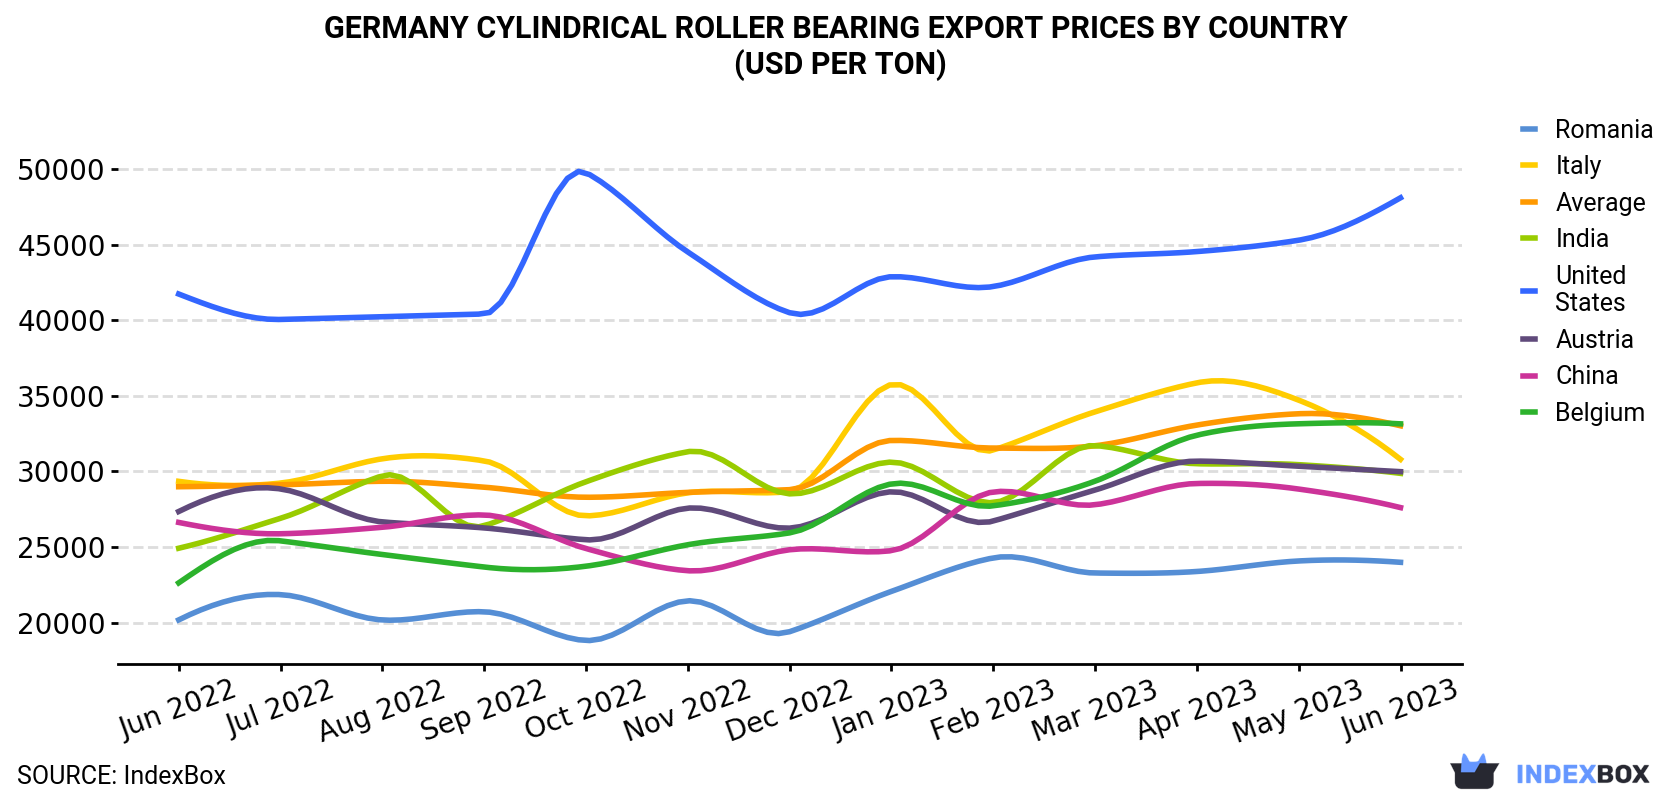 Germany Cylindrical Roller Bearing Export Prices By Country (USD Per Ton)